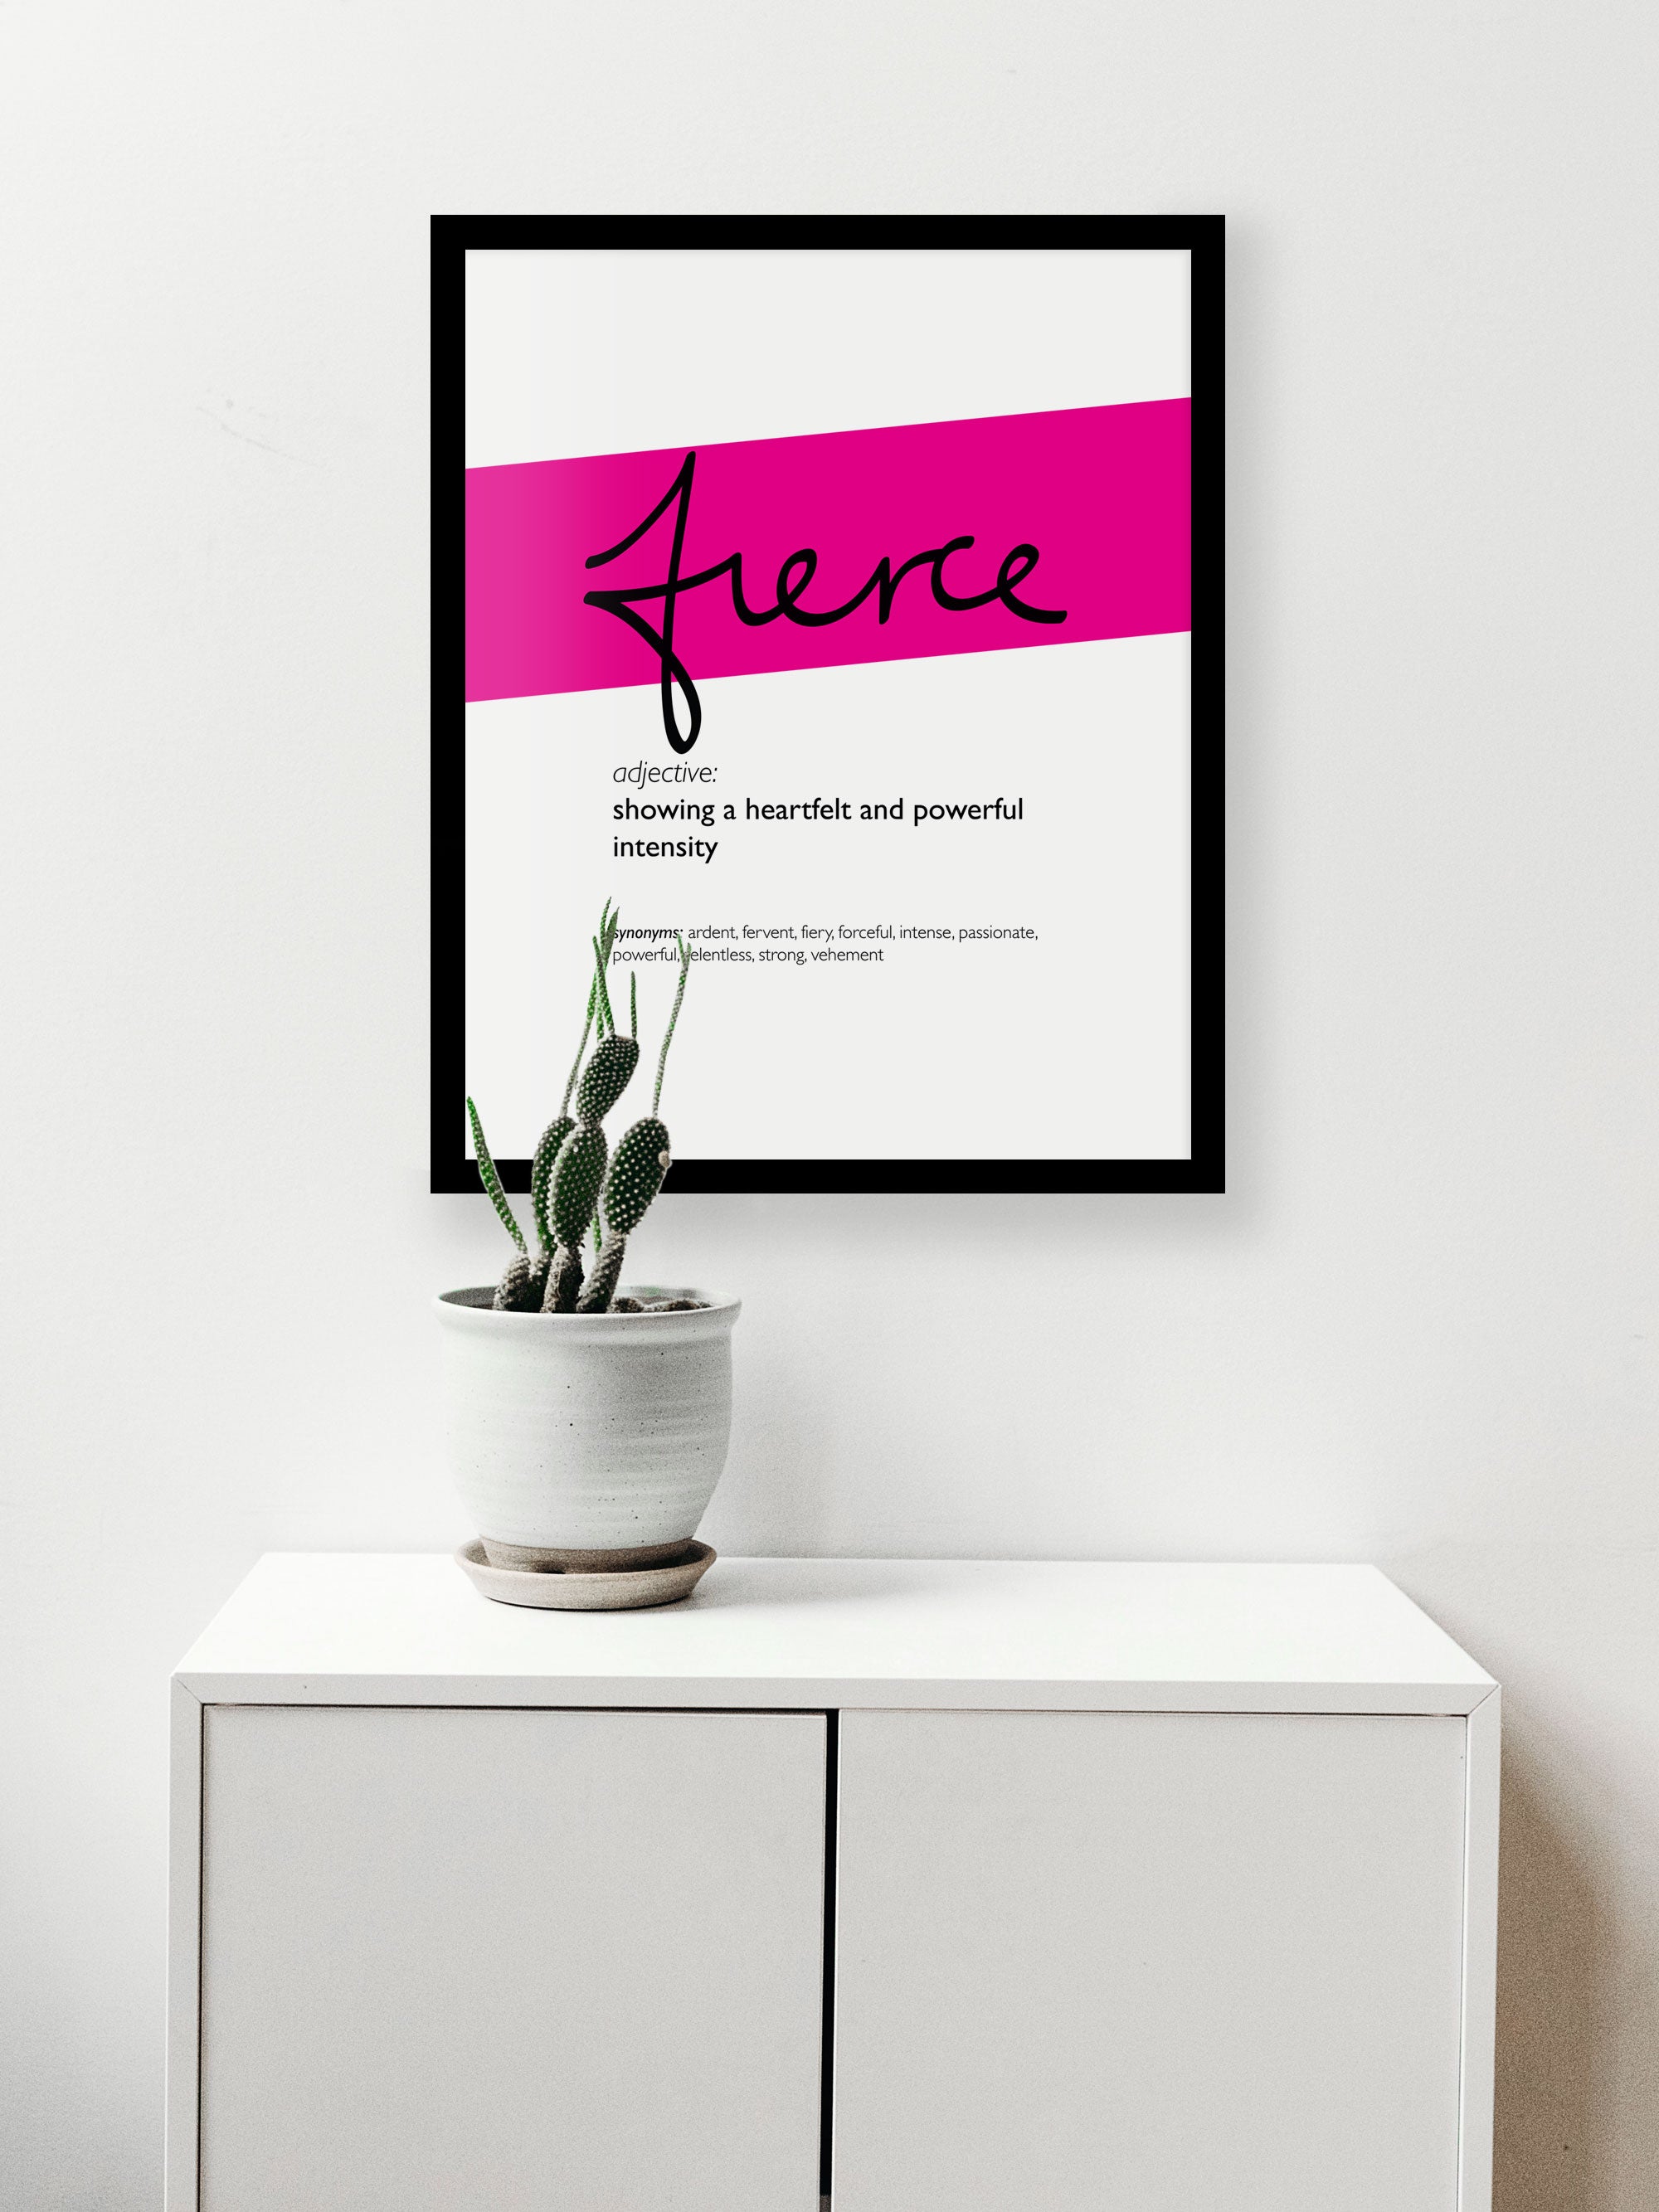 Fierce definition digital wall art - JPG download in five different sizes  with instructions